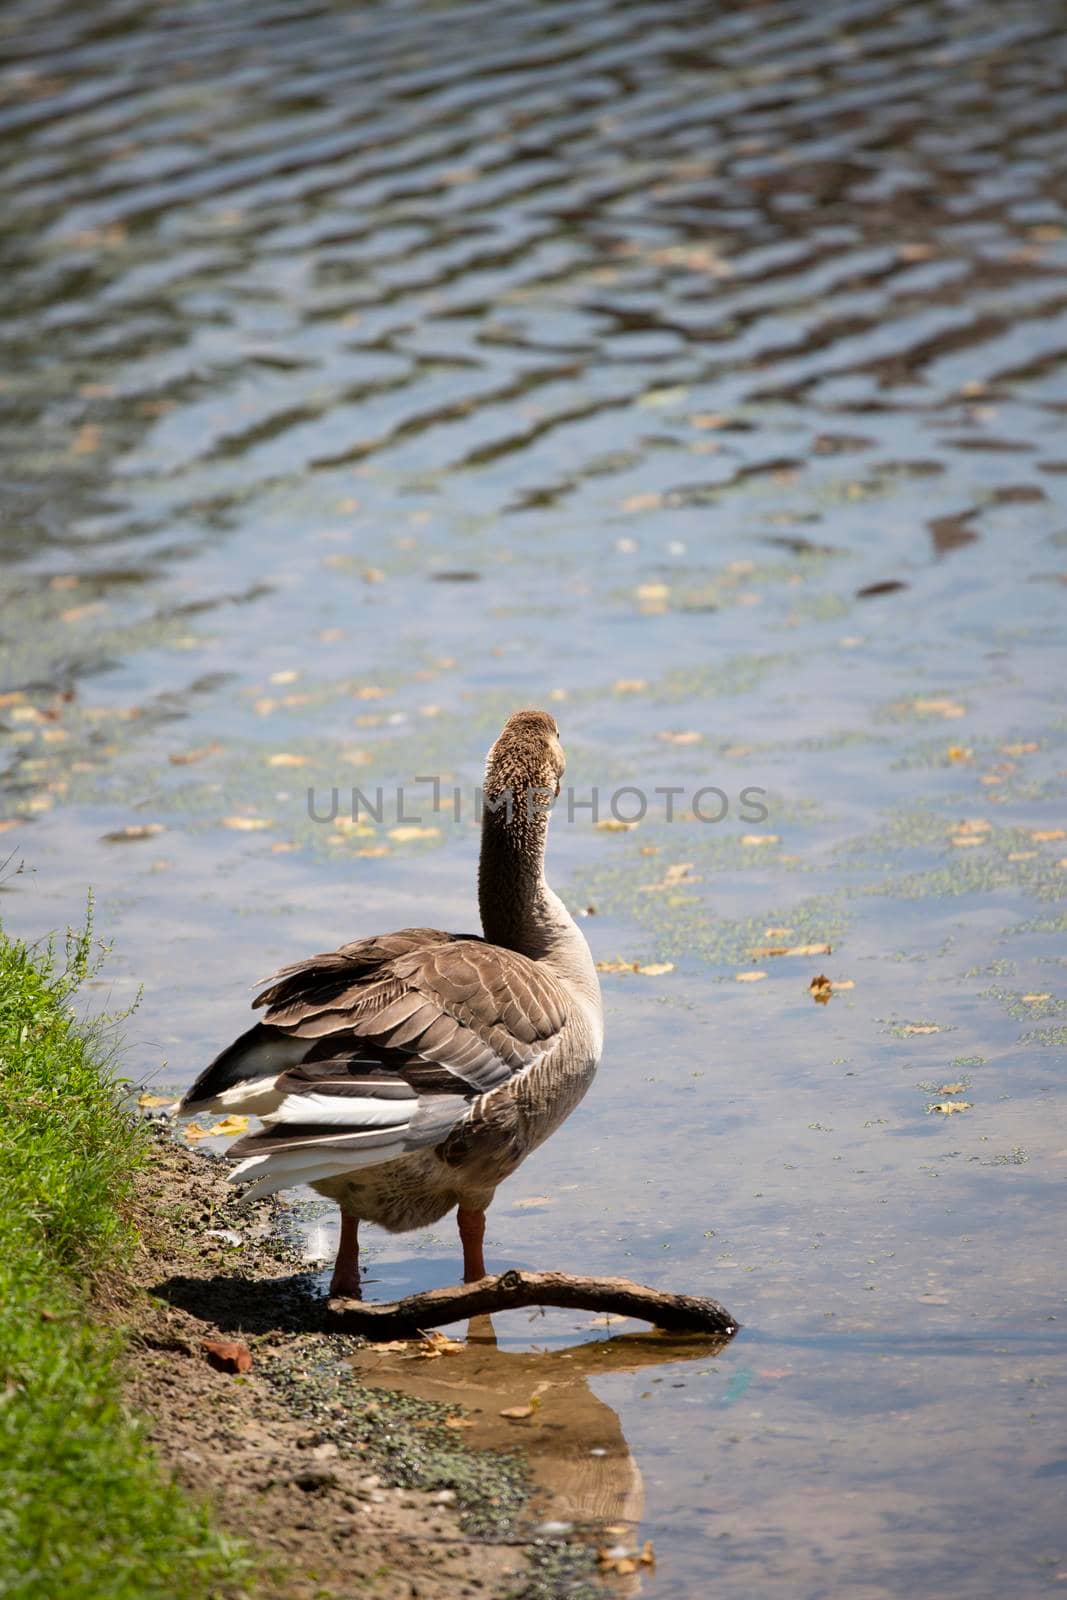 Toulouse Goose Looking out into a Lake by tornado98